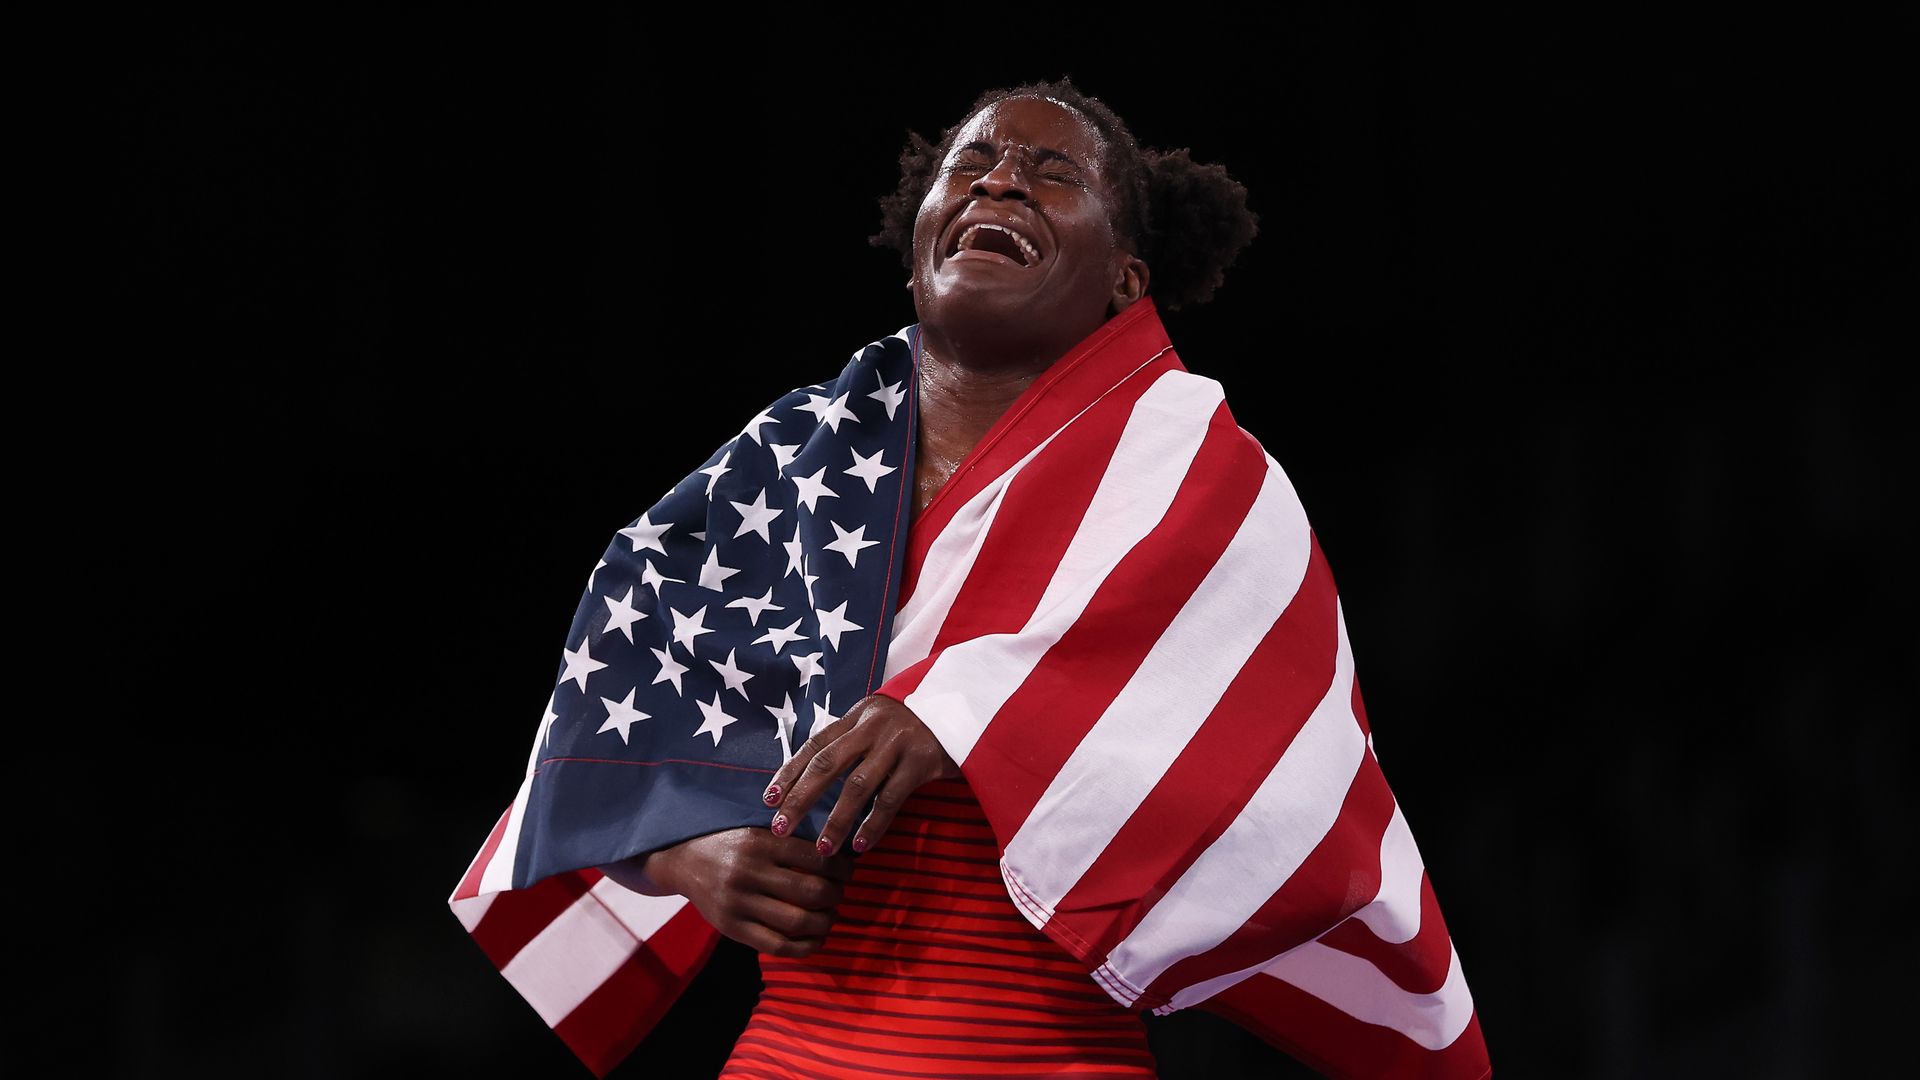 USA's Tamyra Mariama Mensah-Stock  celebrates beating Blessing Oborududu of Nigeria in the Women's Freestyle 68kg Gold Medal Match at the Olympic Games on August 03, 2021 in Chiba, Japan.